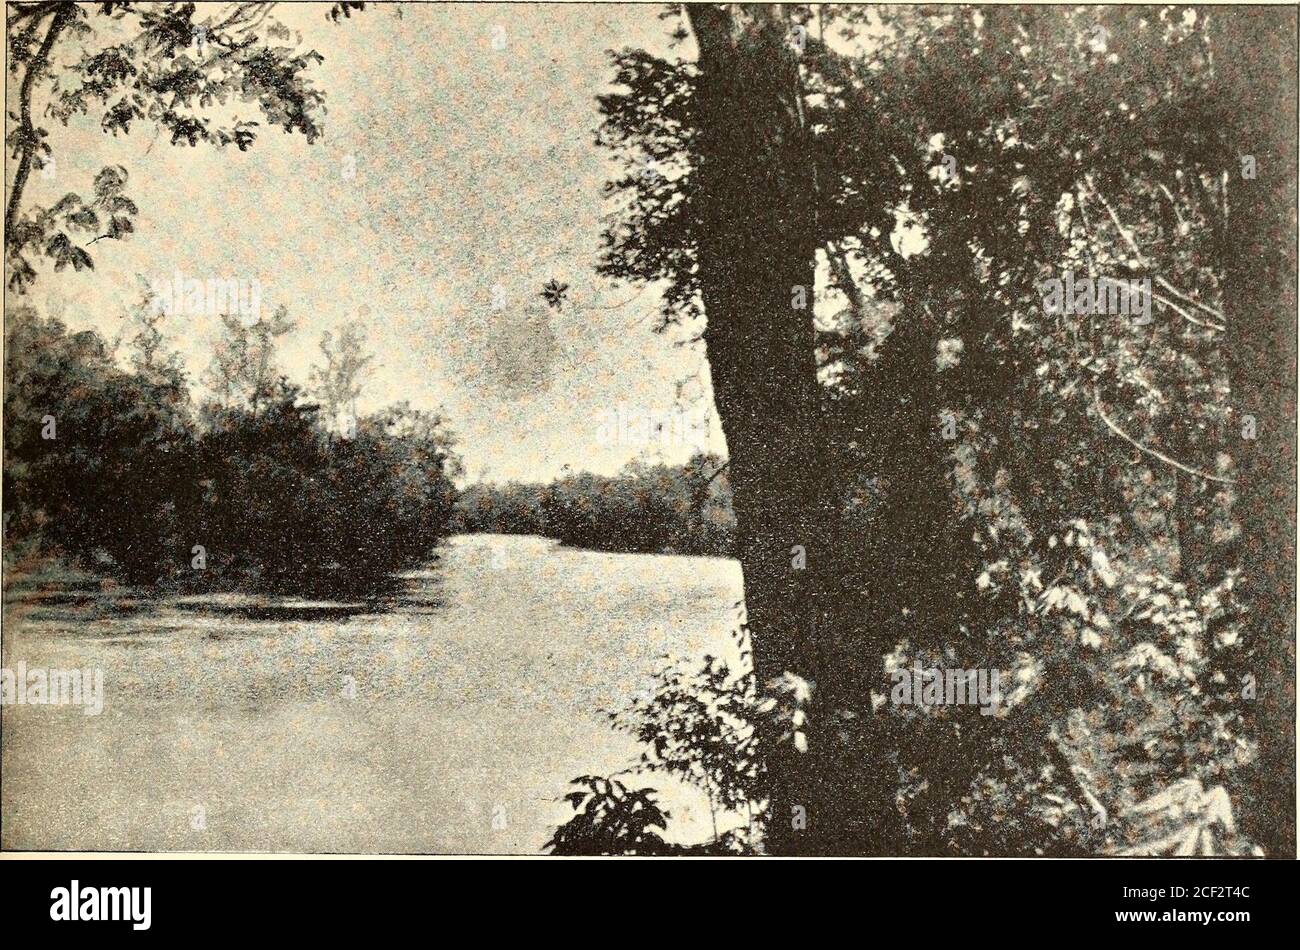 . The Lincoln autographic album : embracing likewise the favorite poetry of Abraham Lincoln. J^zusC &£t-clsuLj From LIFE ON THE CIRCUIT WITH LINCOLN.. SANGAMON RIVER, ABOVE NEW SALEM. From LIFE ON THE CIRCUIT WITH LINCOLN. Stock Photo